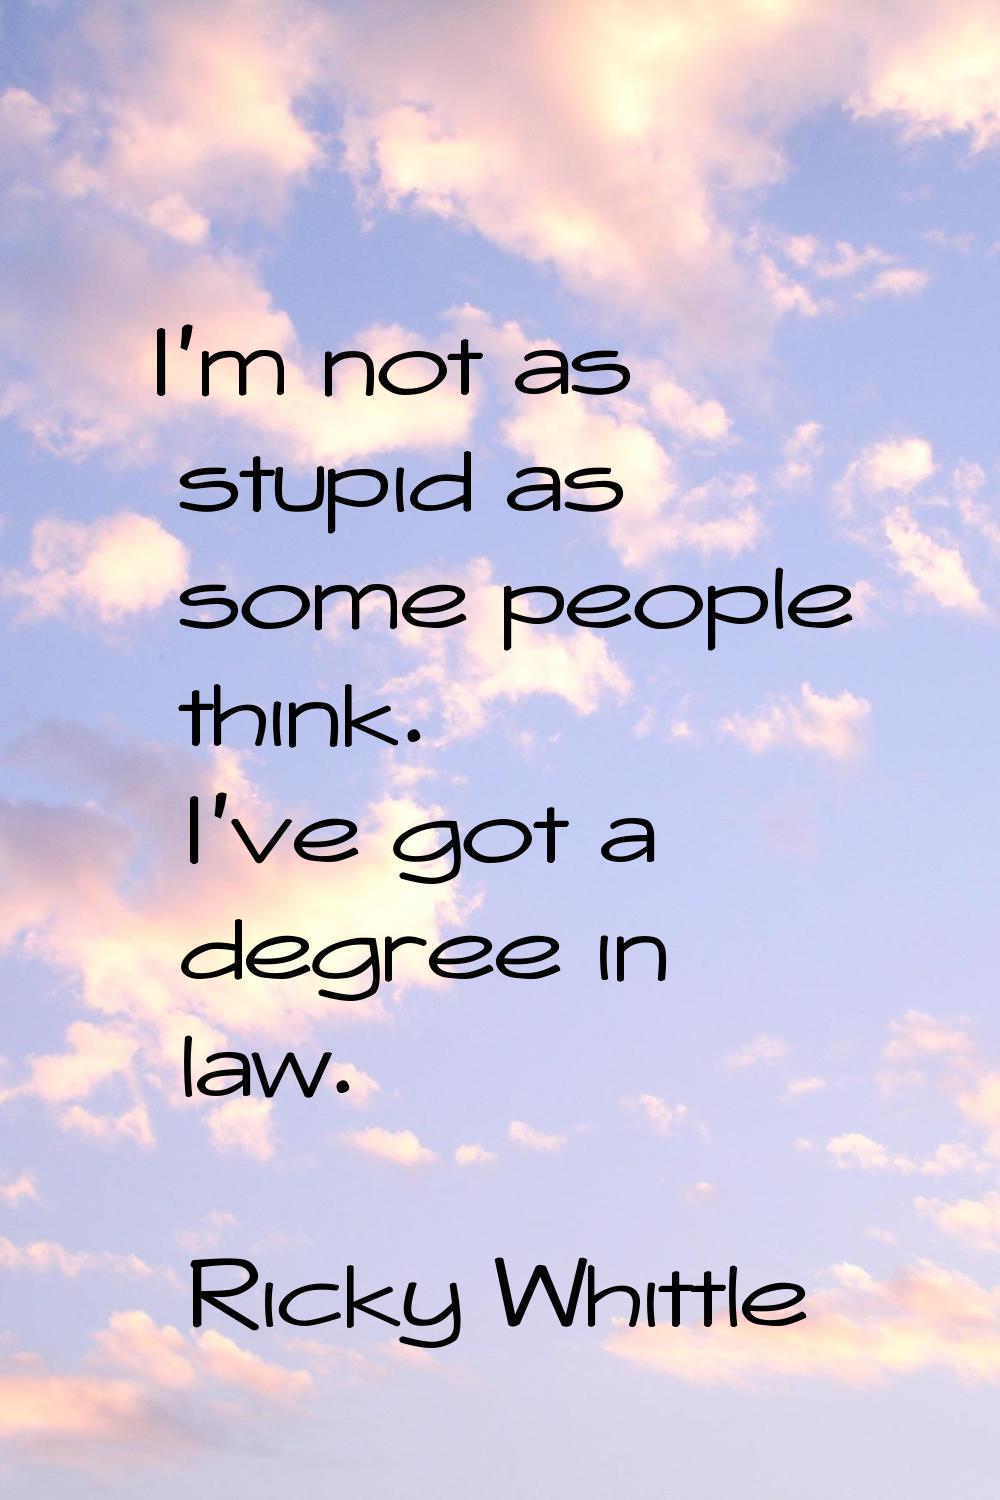 I'm not as stupid as some people think. I've got a degree in law.